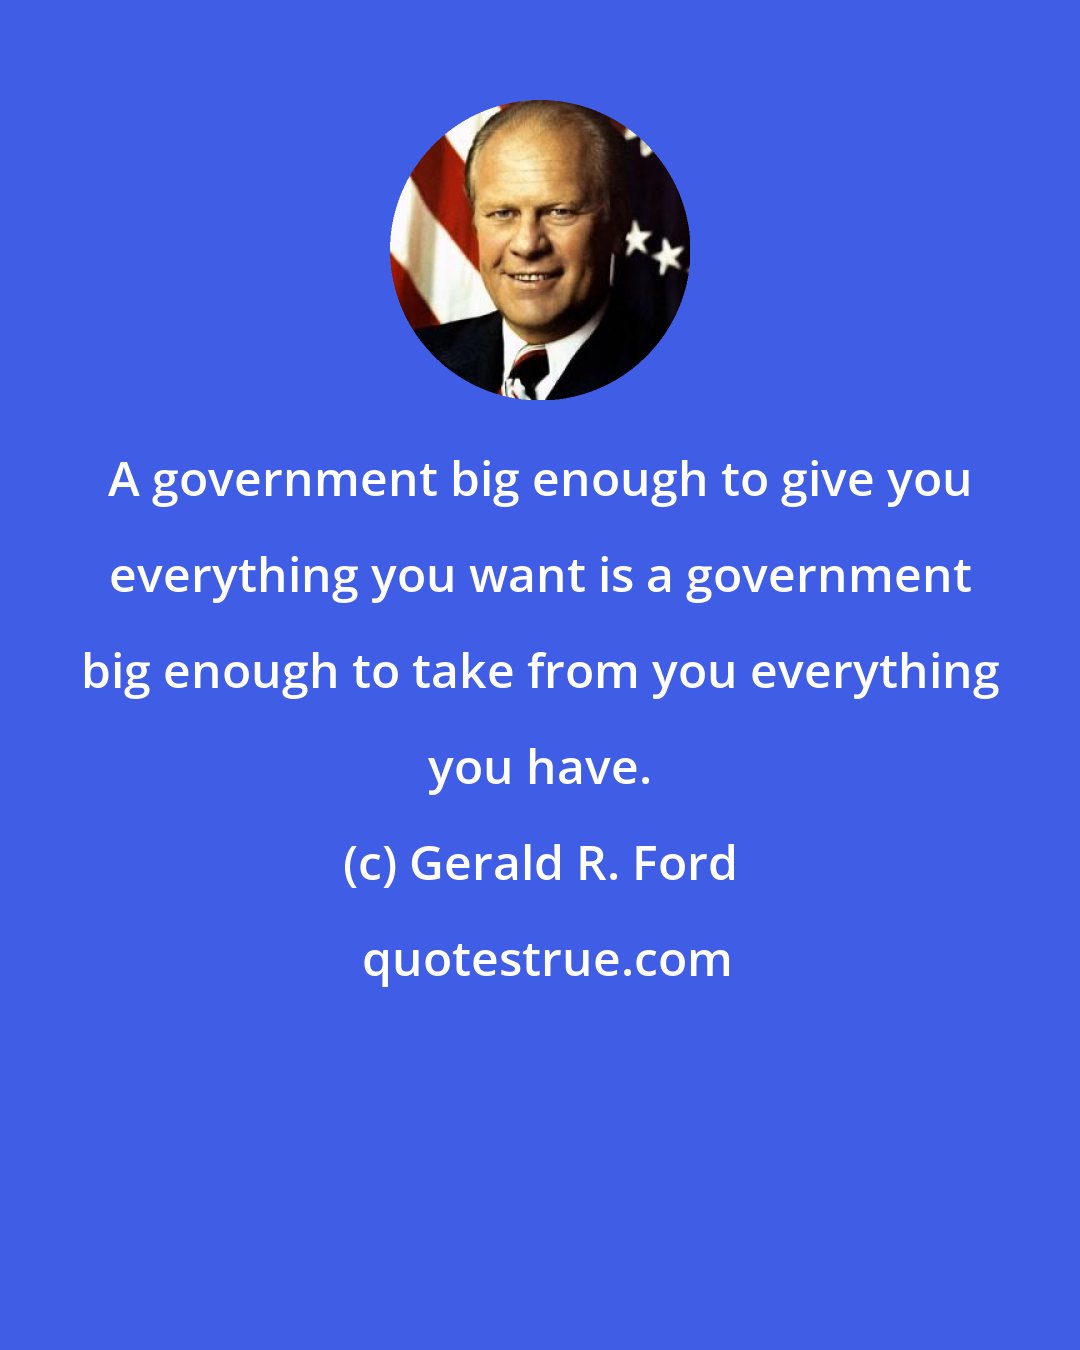 Gerald R. Ford: A government big enough to give you everything you want is a government big enough to take from you everything you have.